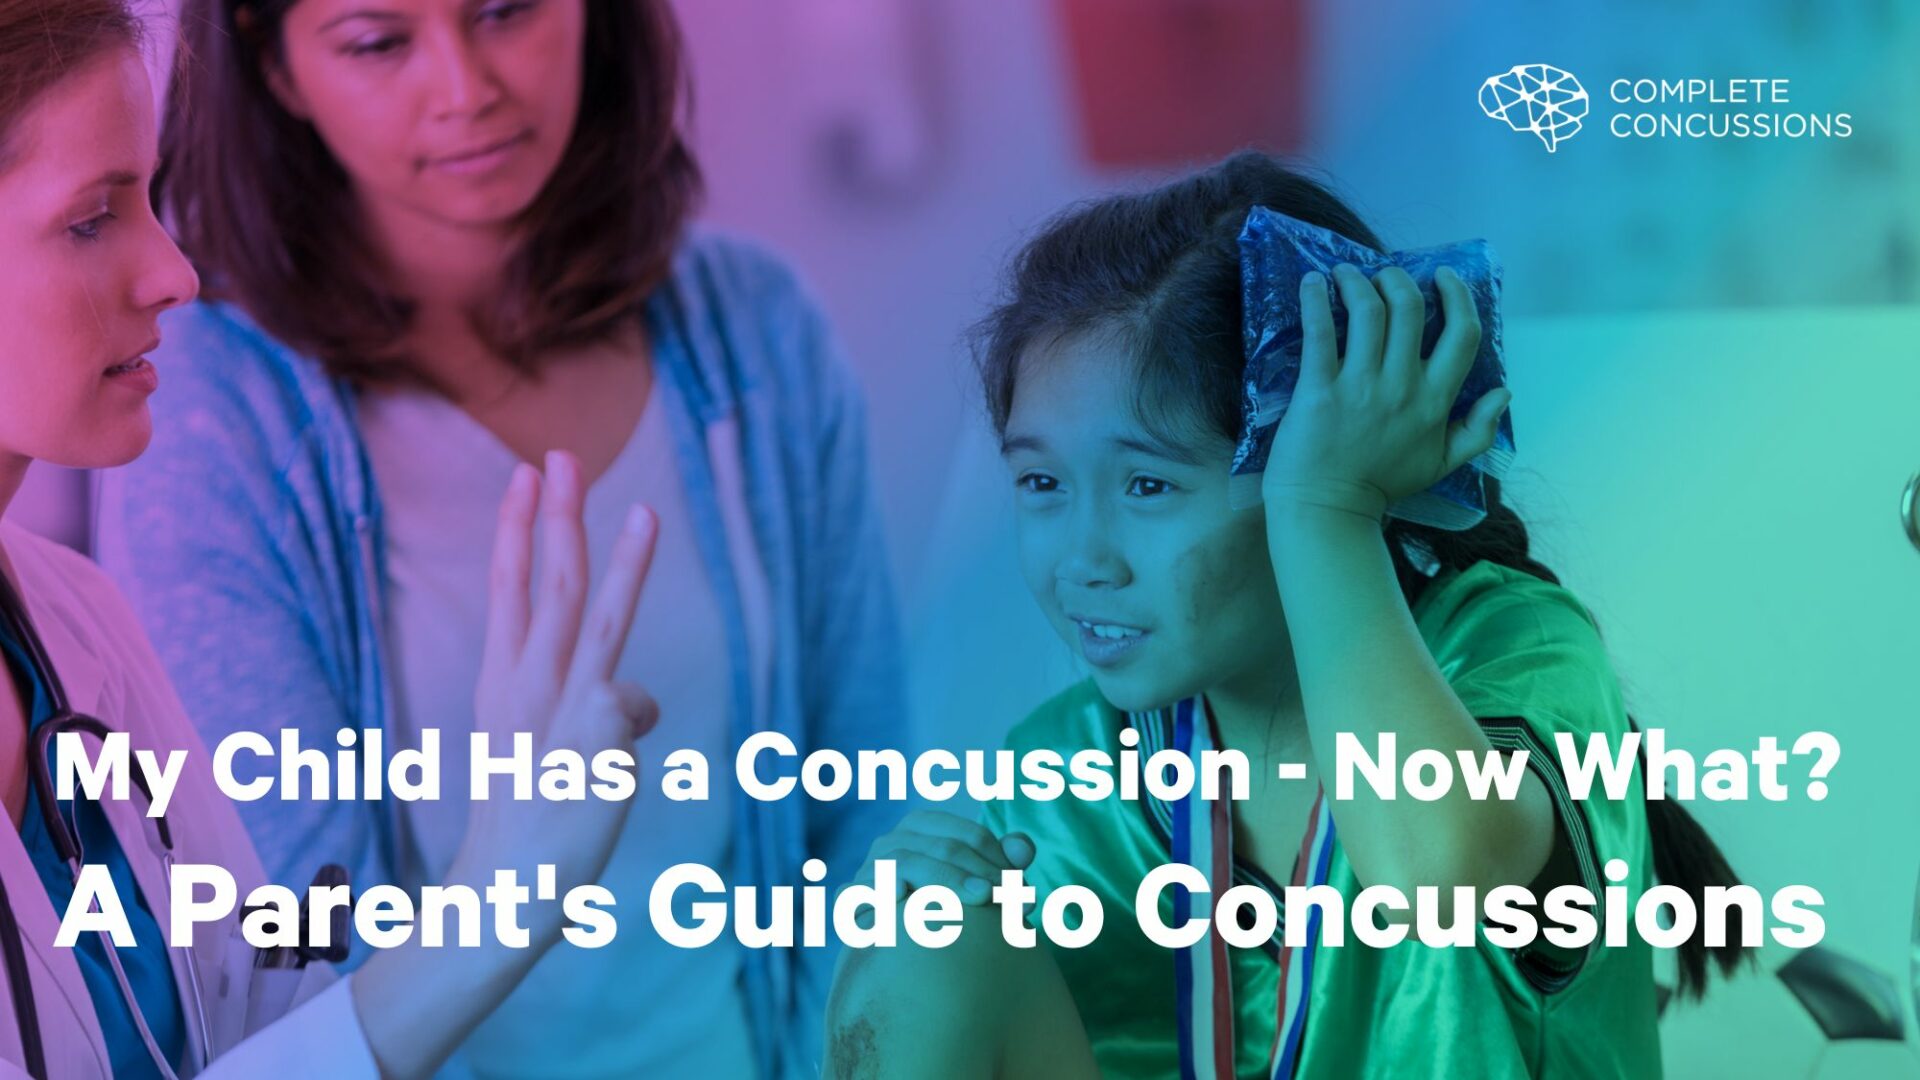 My Child Has a Concussion - Now What? A Parent's Guide to